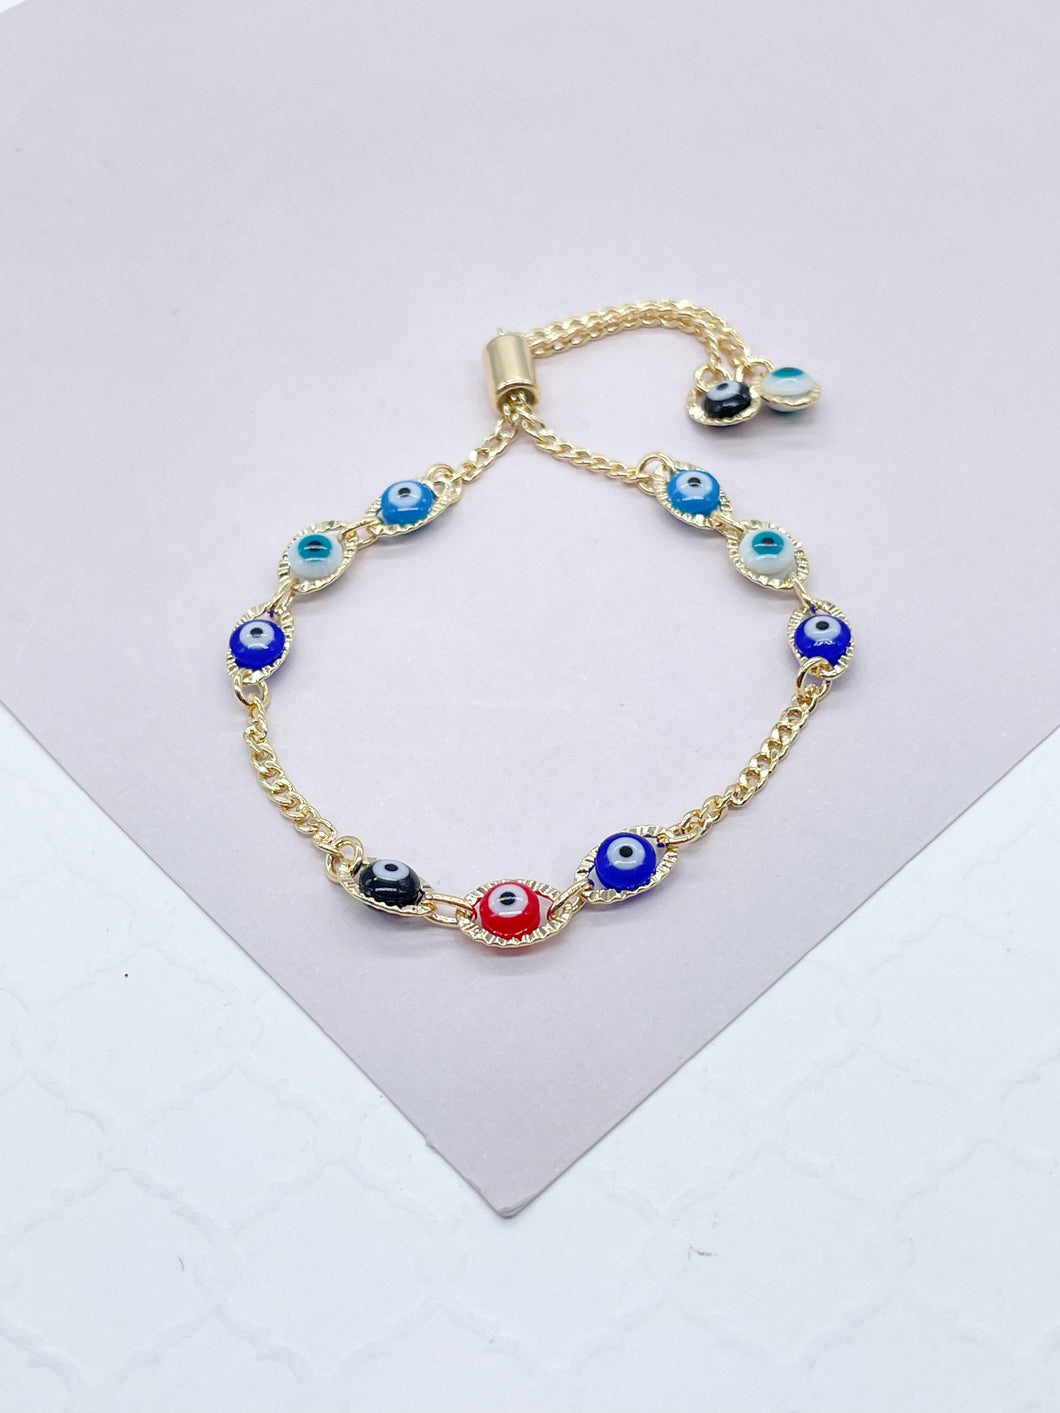 18K Gold Filled Adjustable Link Bracelet With Multi-Colored BraceletWholesale Jewelry Supplies